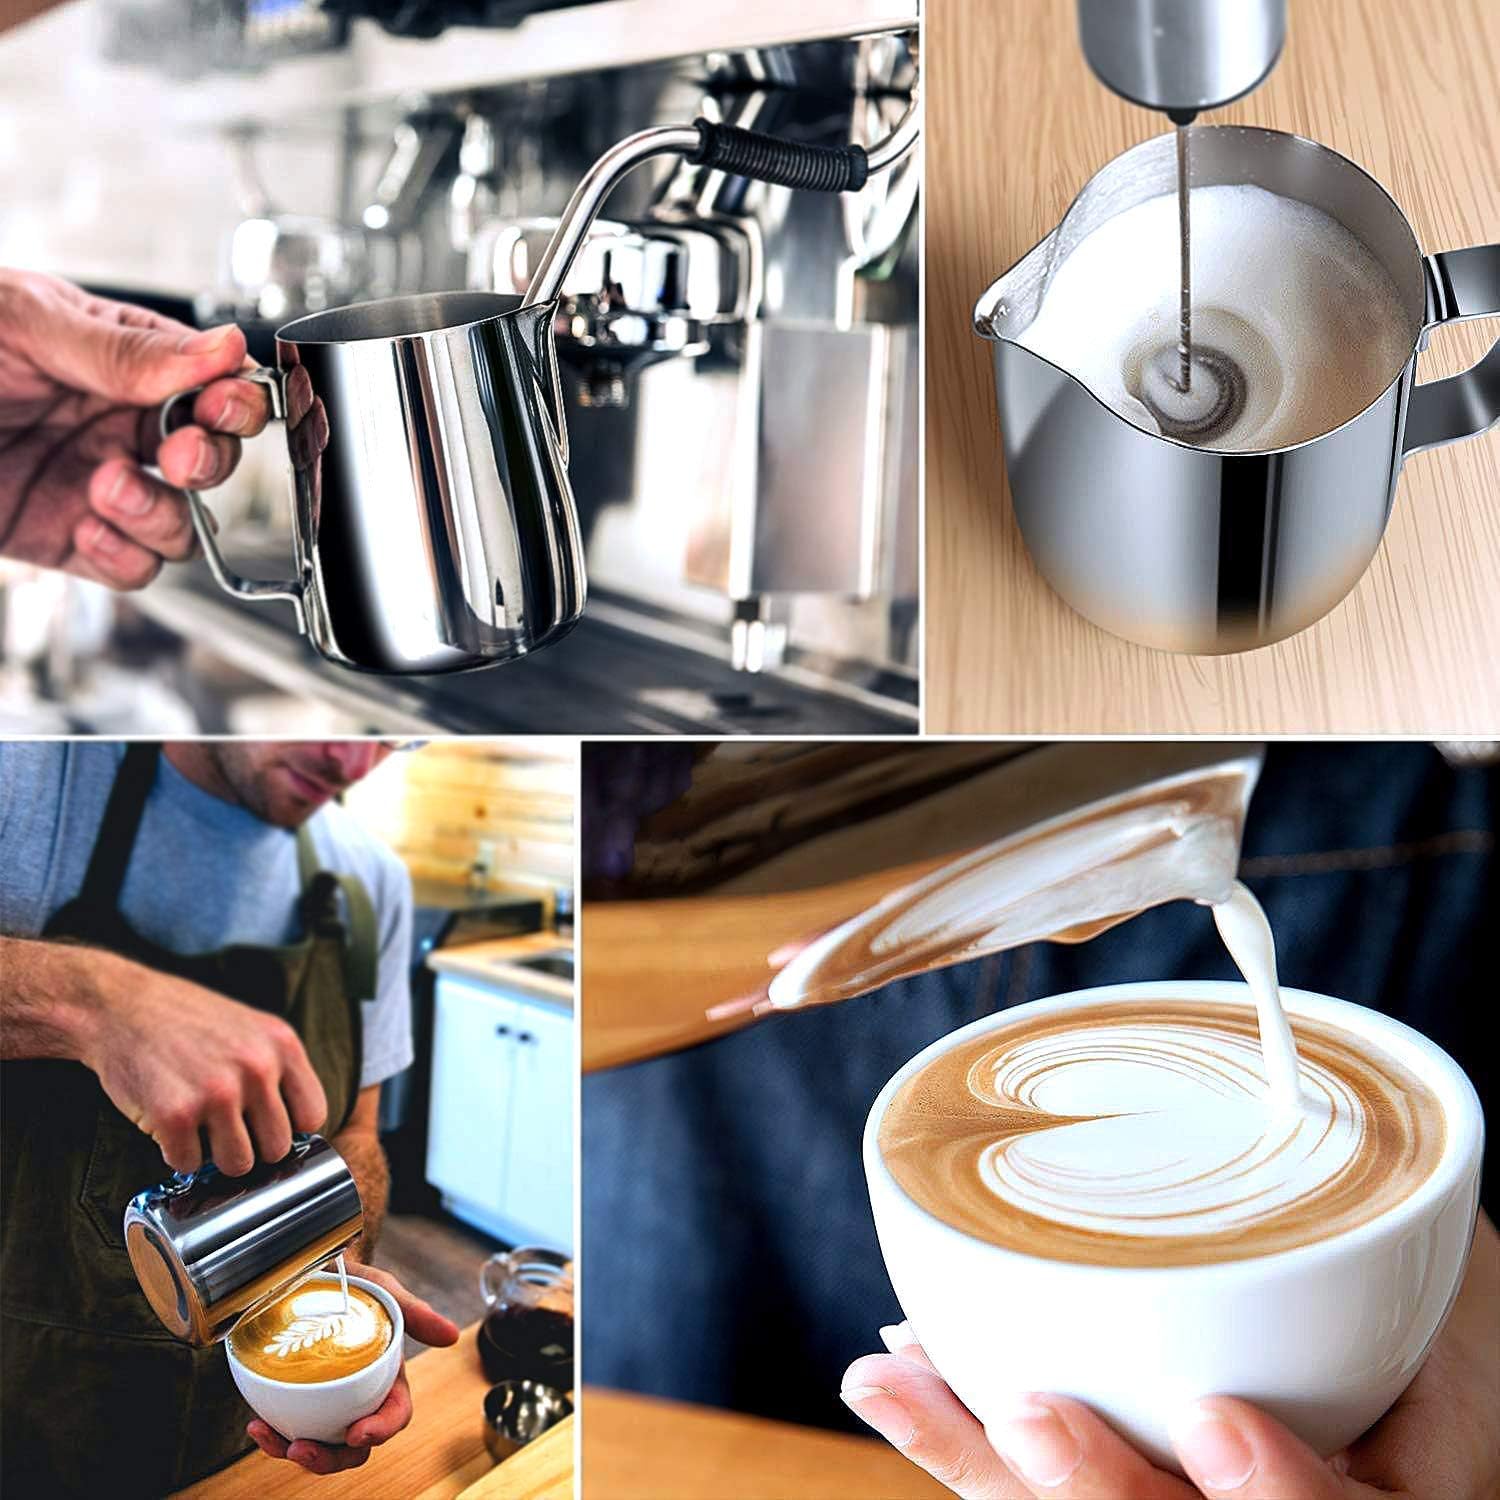 Milk Frothing Pitcher-Measurement on the Inside, Frothing pitcher, Coffee Pitcher Perfect for Espresso Machines, Stainless Steel Milk Frother Cup for Latte Art(12oz/350ml).